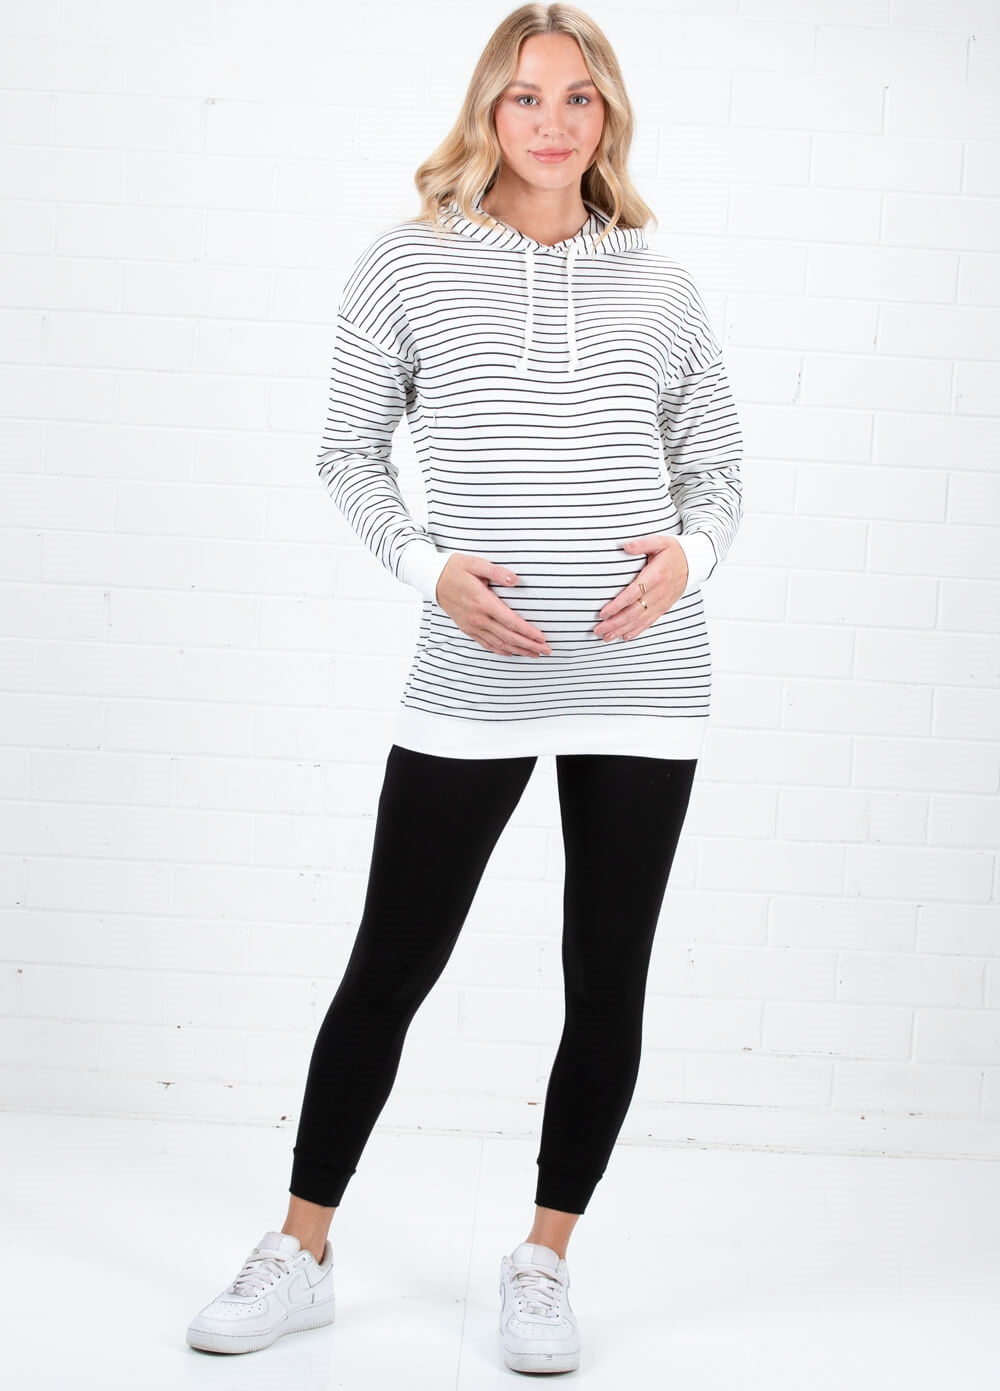 Martinique Pregnancy & Feeding Hoodie in Stripes by Lait & Co